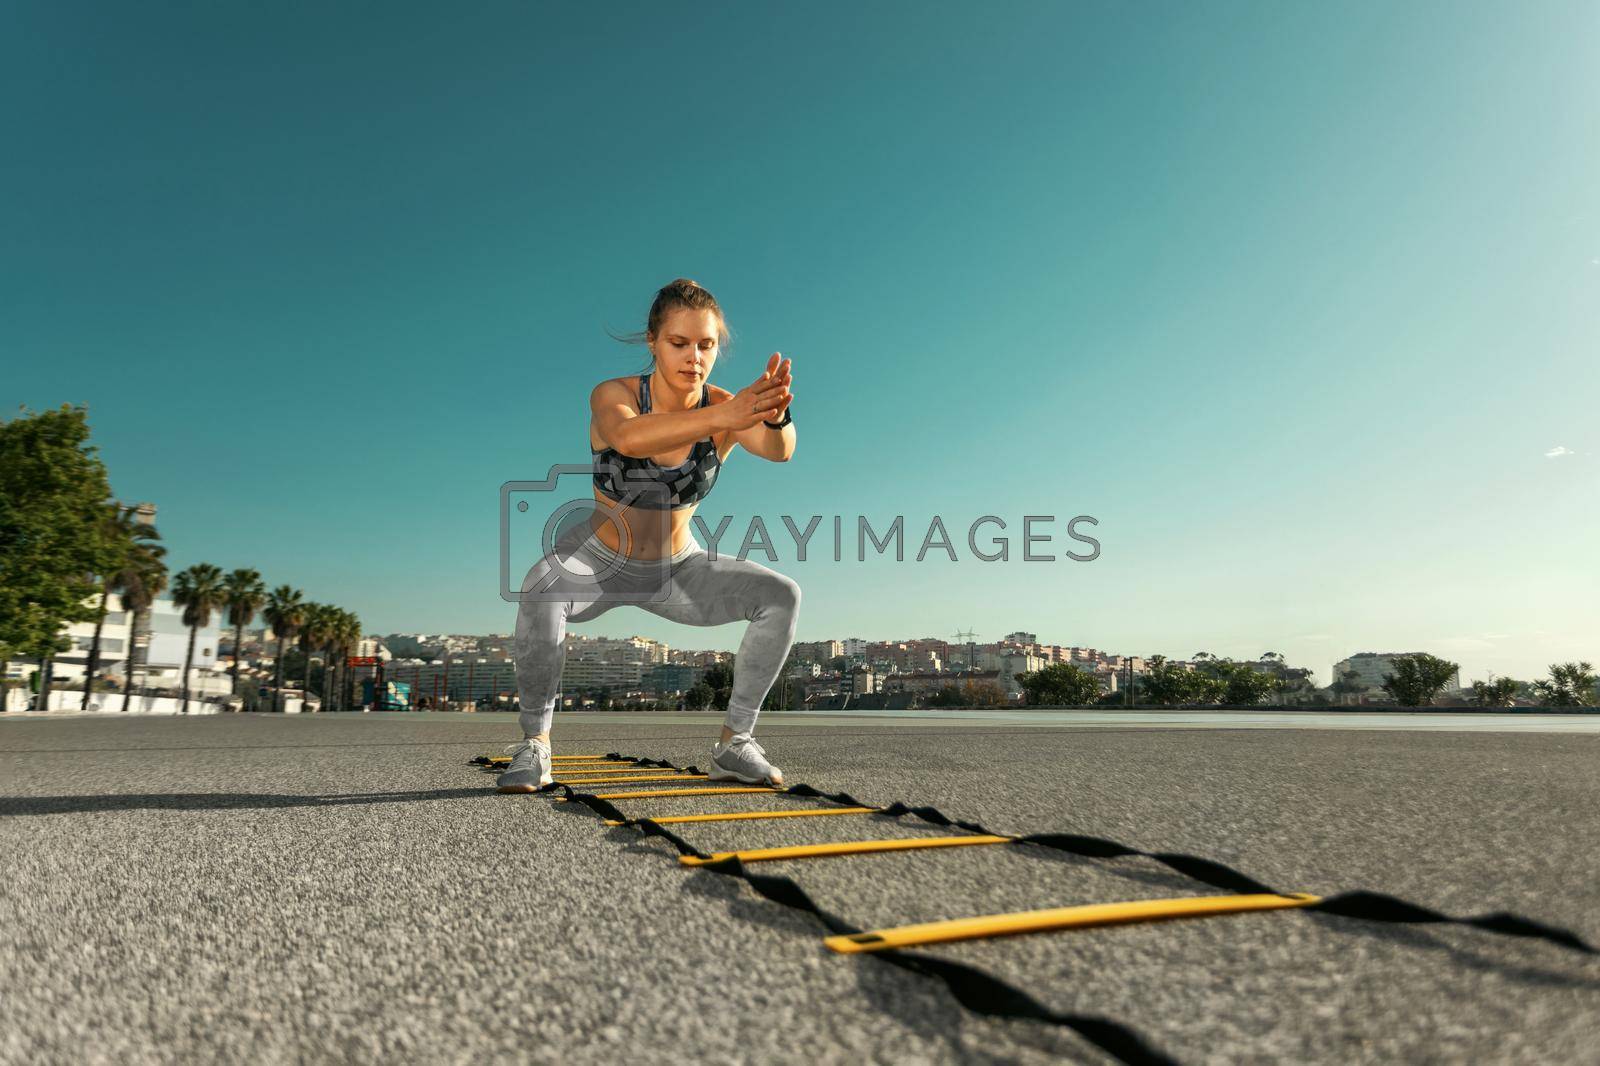 Royalty free image of Young sportswoman training jumping on an agility ladder coordinating outdoors by MikeOrlov